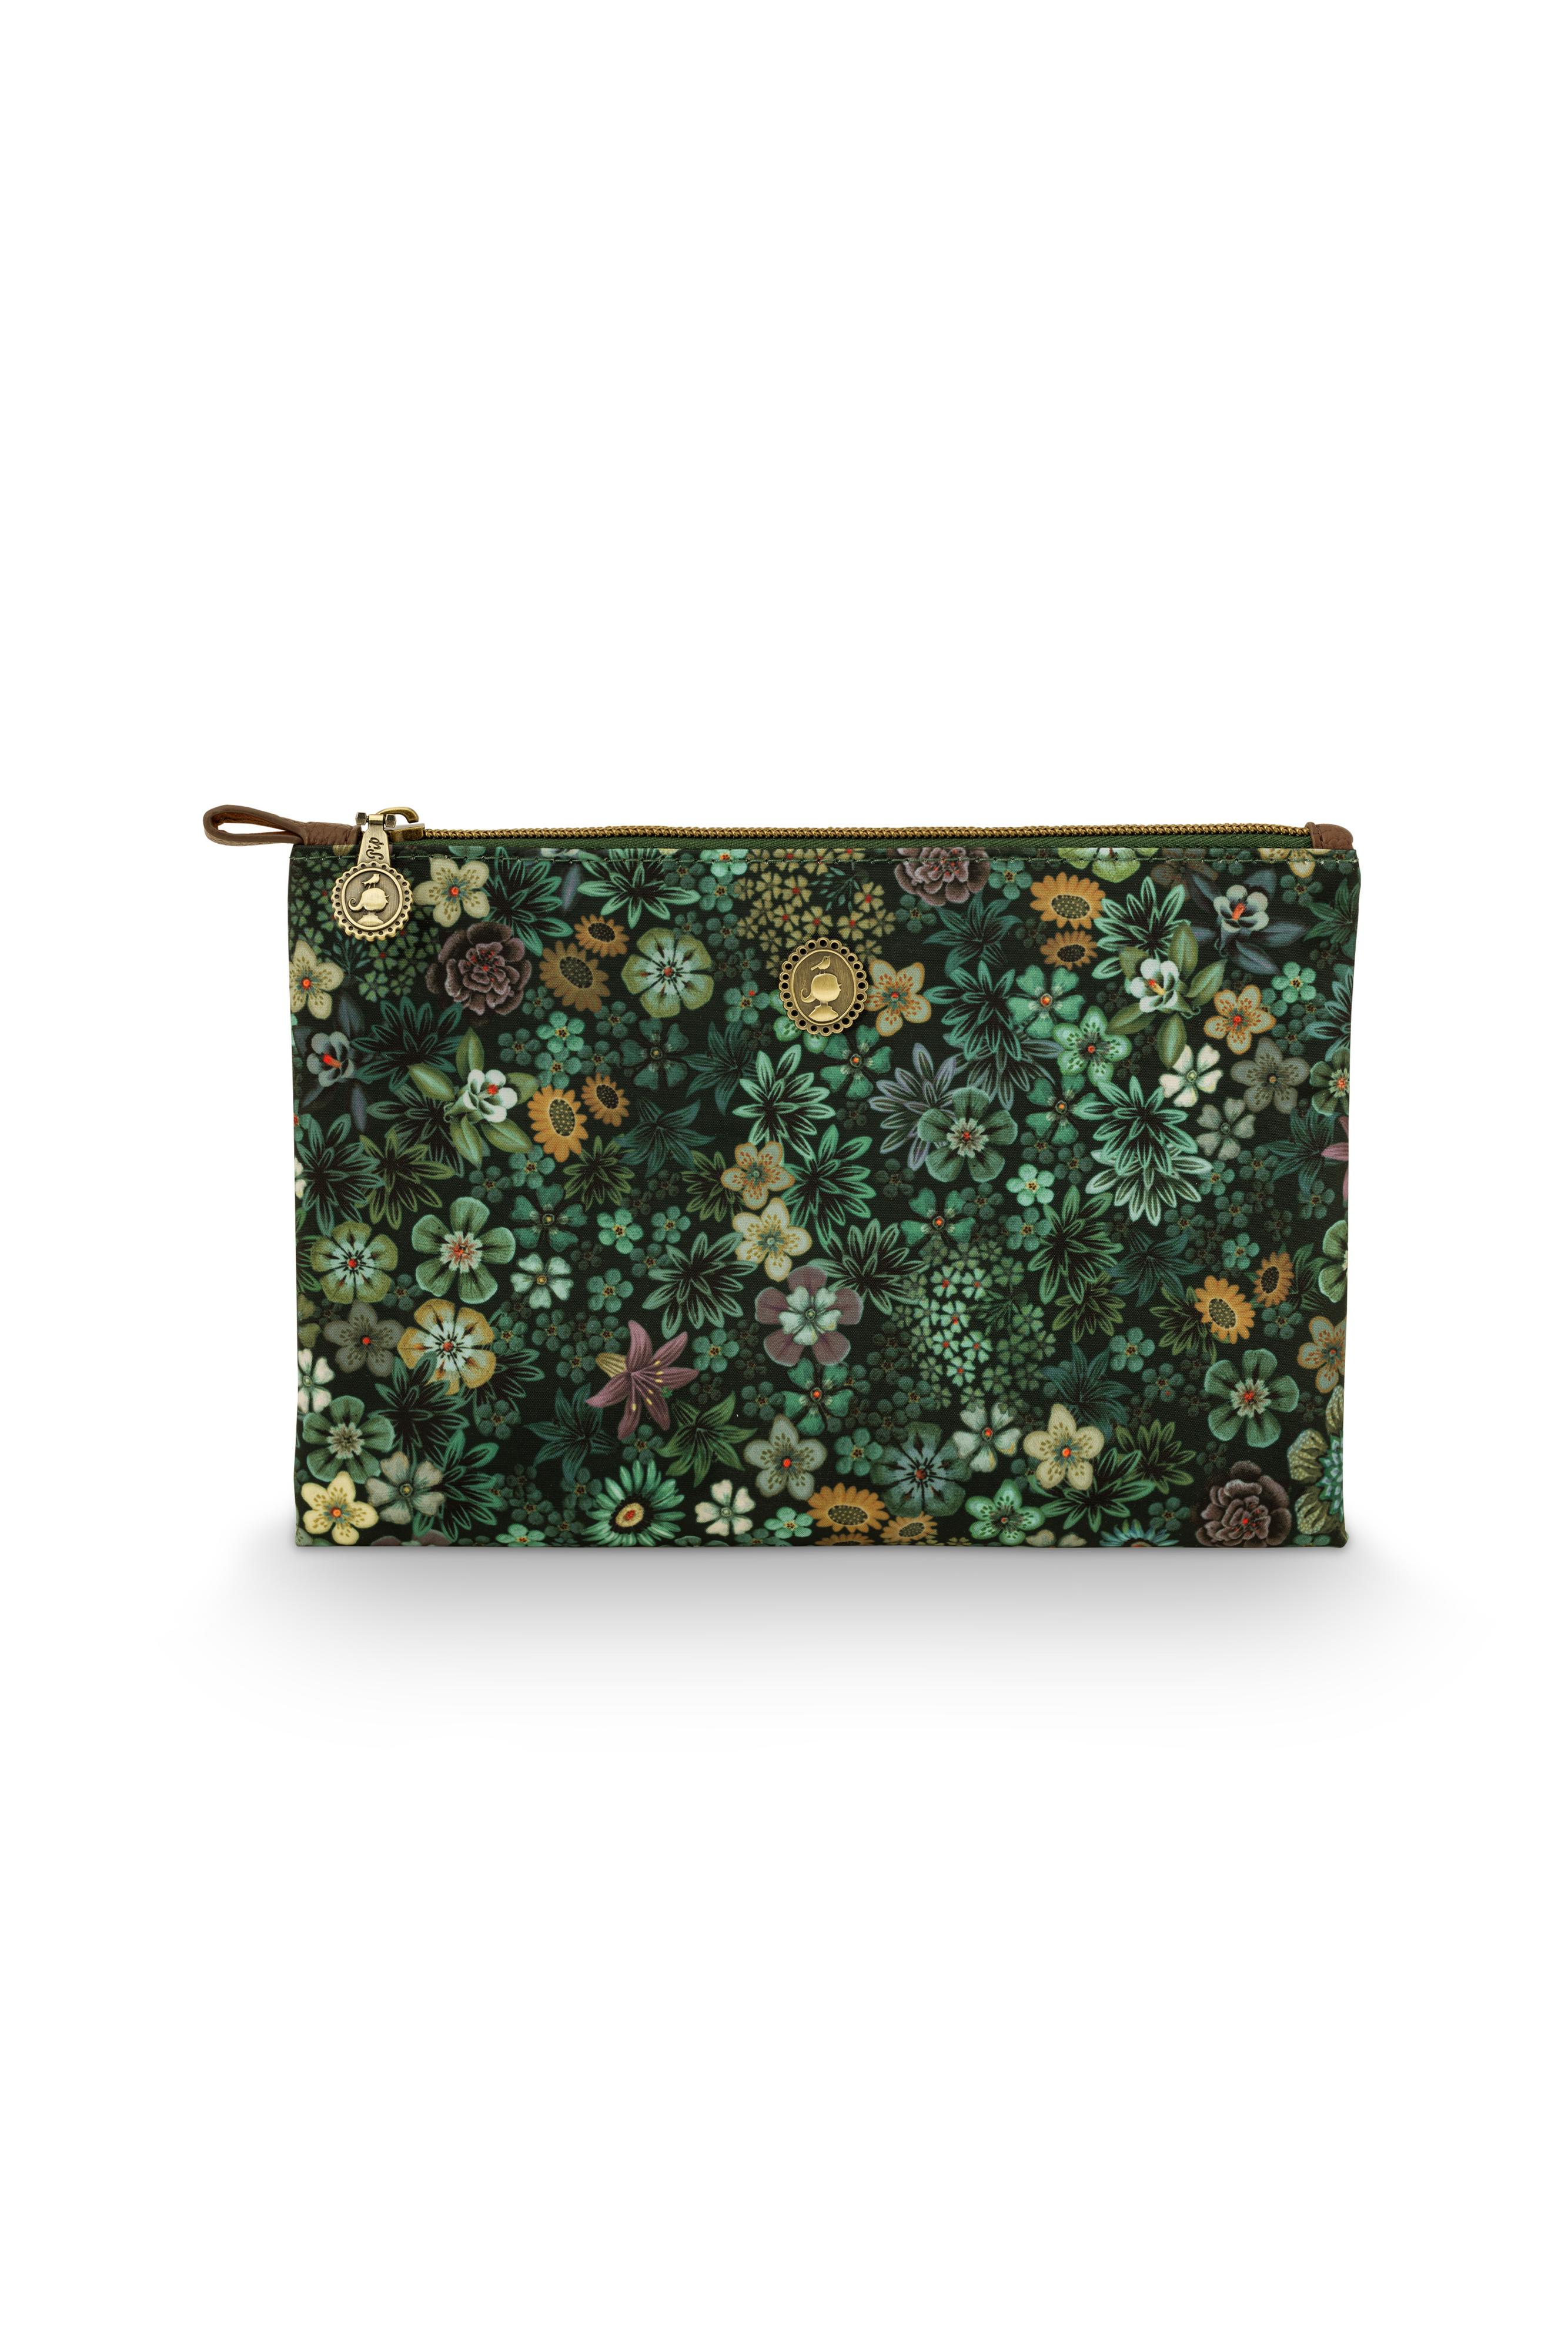 Charly Cos Flat Pouch Med Tutti  Green 24x15. Gift